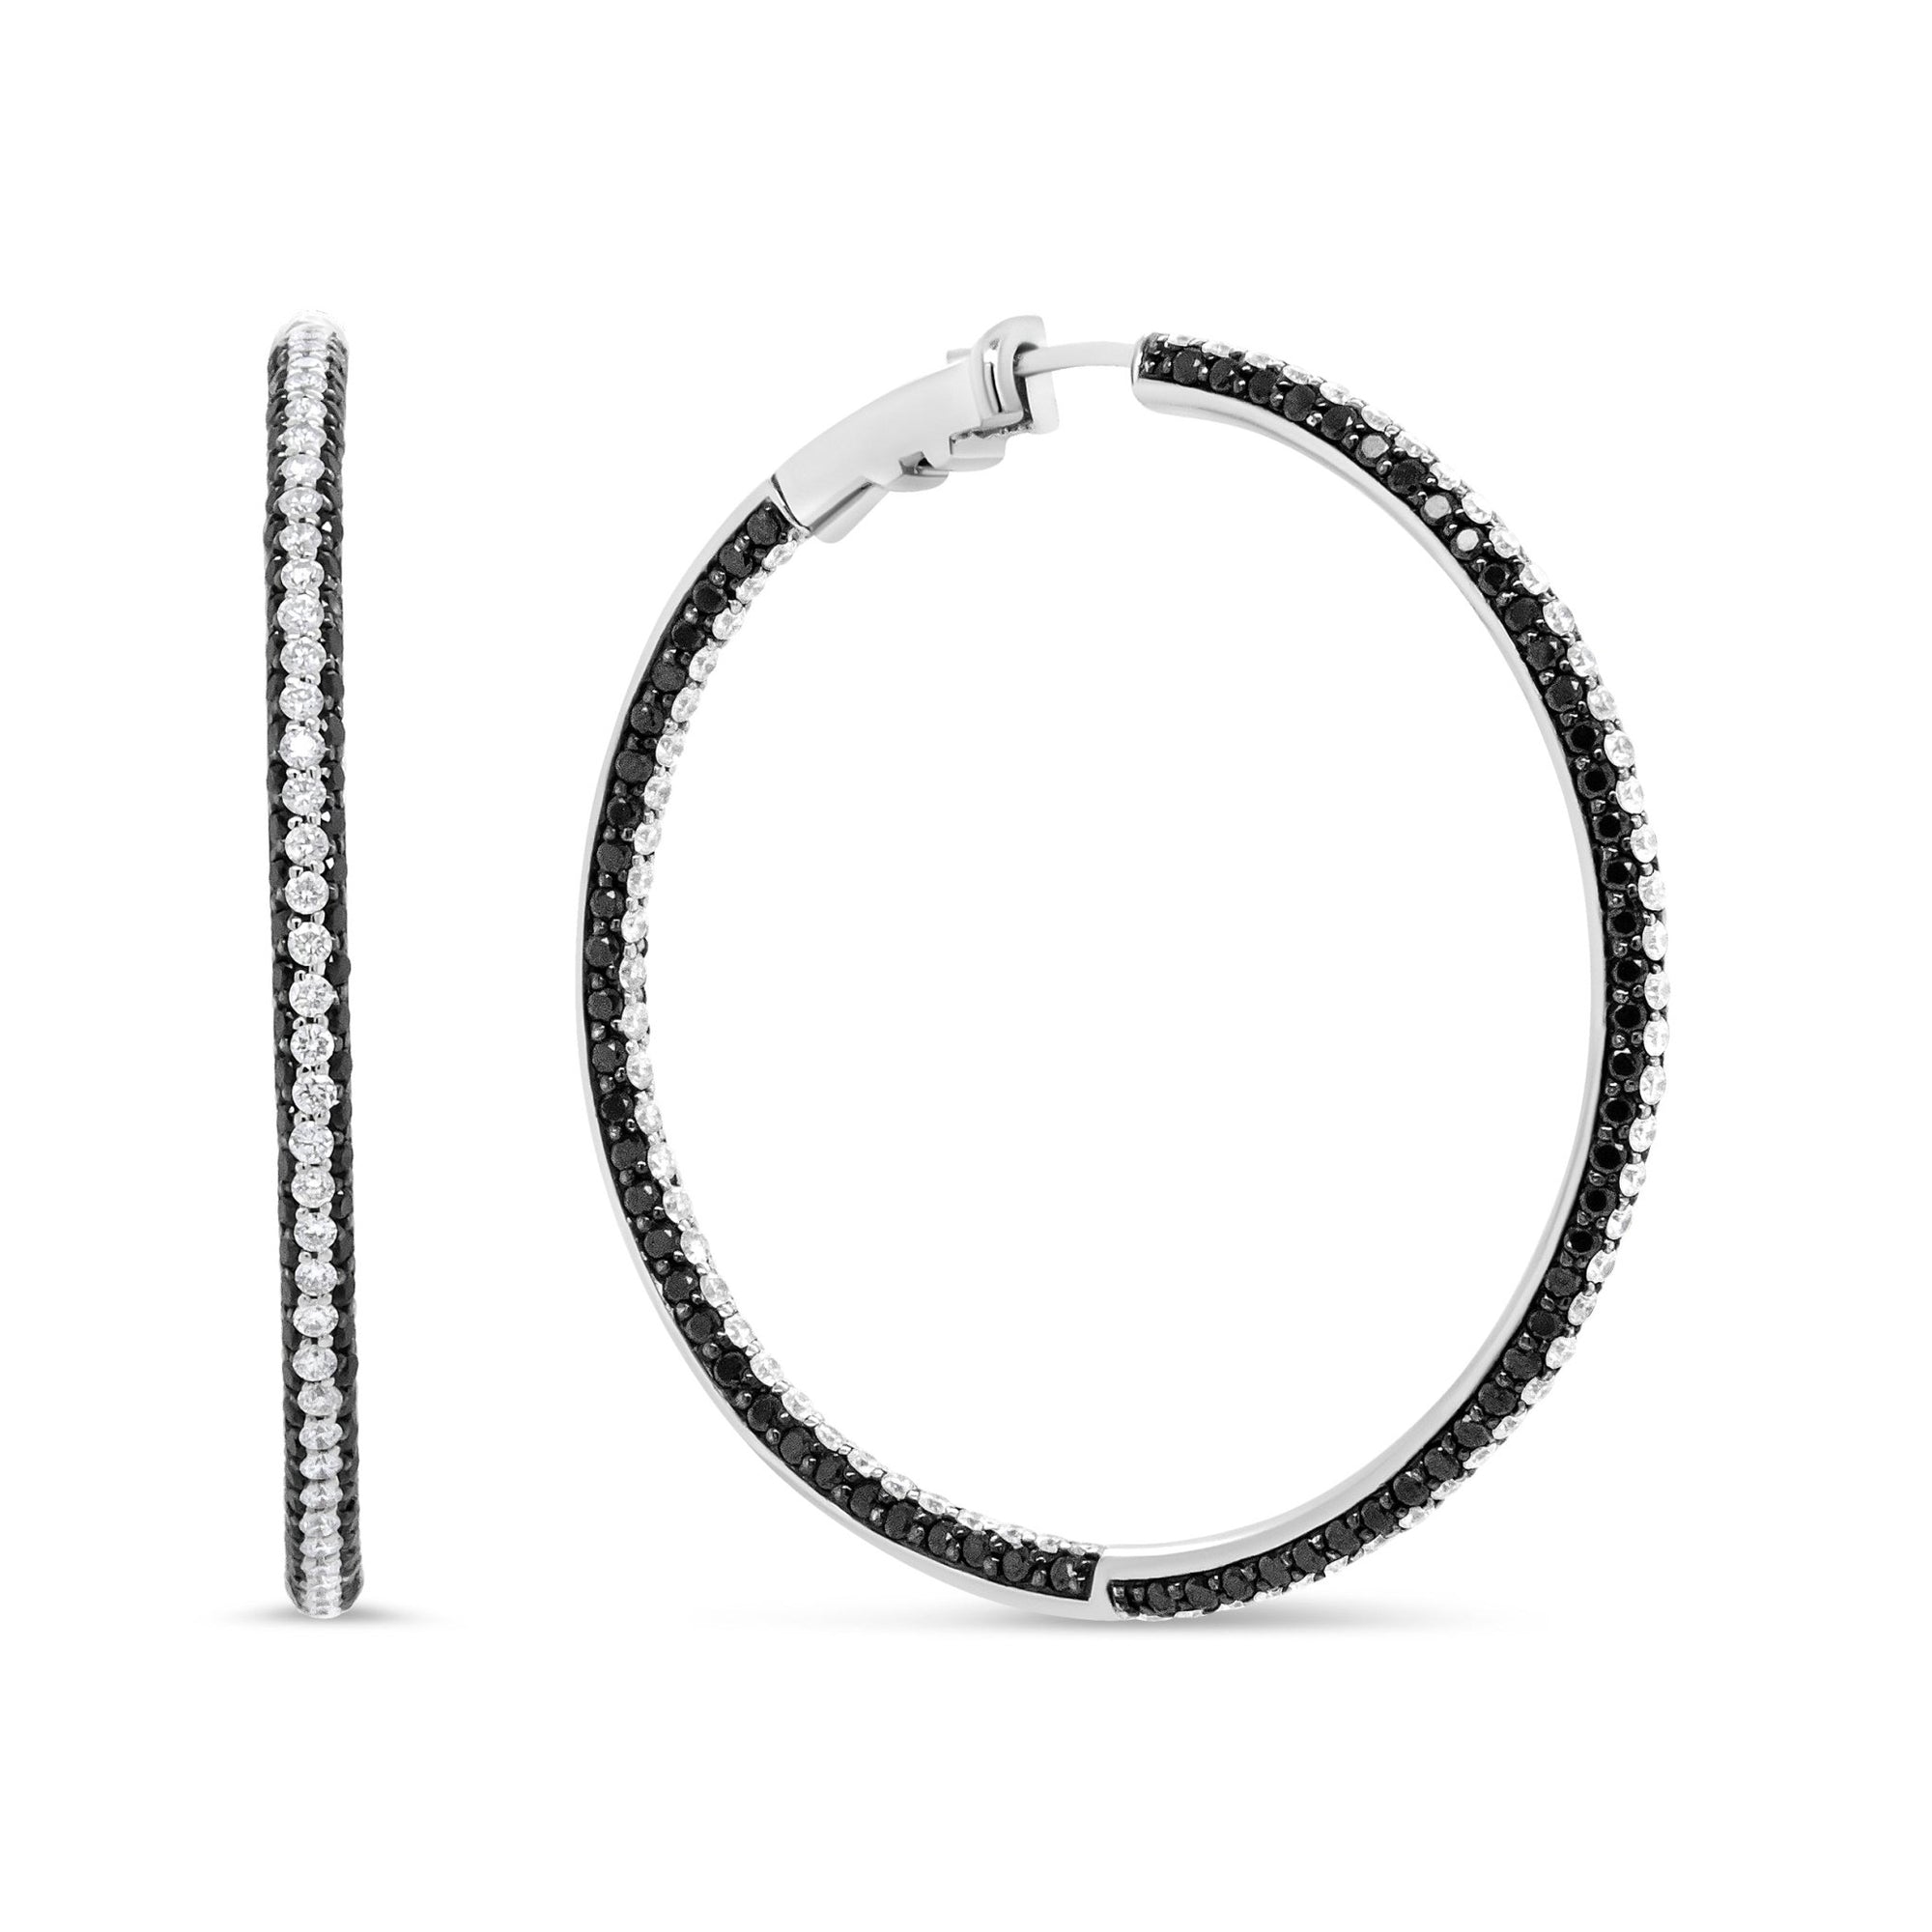 18K White Gold 3 1/4 Cttw Round Black and White Diamond Inside-Outside Hoop Earrings (Black and F-G Color, VS1-VS2 Clarity) - LinkagejewelrydesignLinkagejewelrydesign